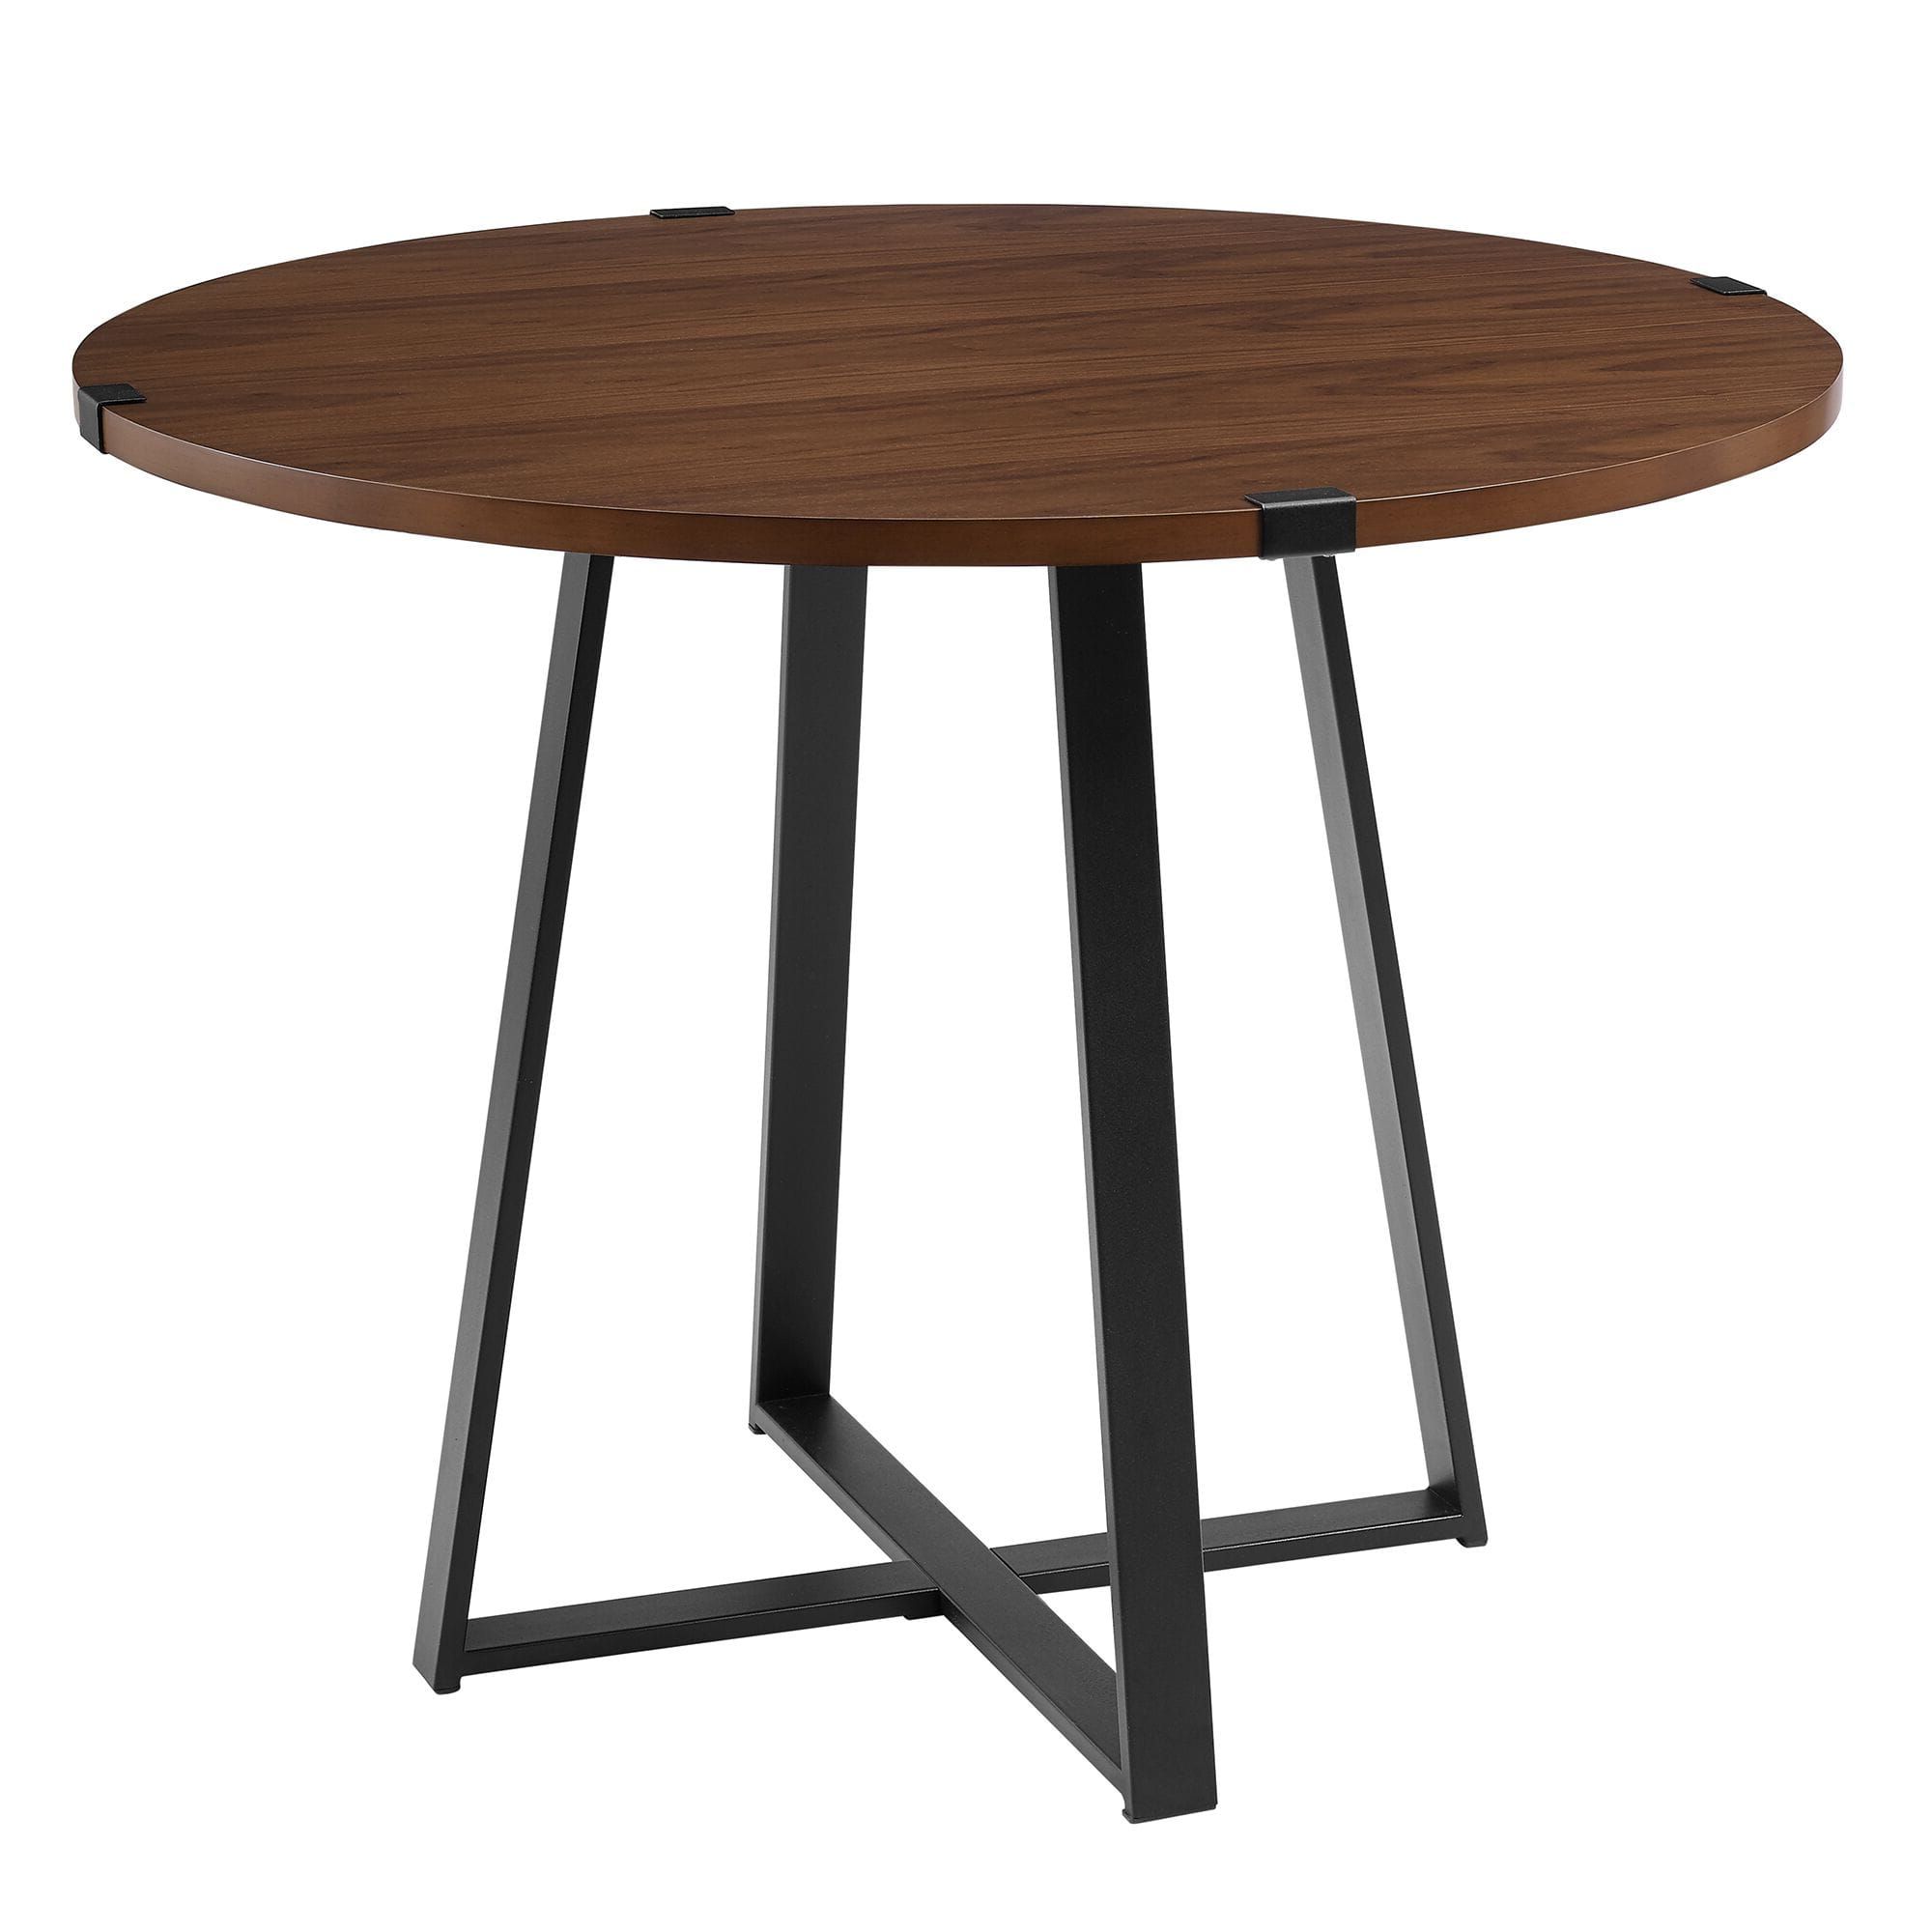 Walnut And White Dining Tables Within 2019 40 Inch Urban Industrial Metal Wrap Round Dining Table (View 7 of 20)